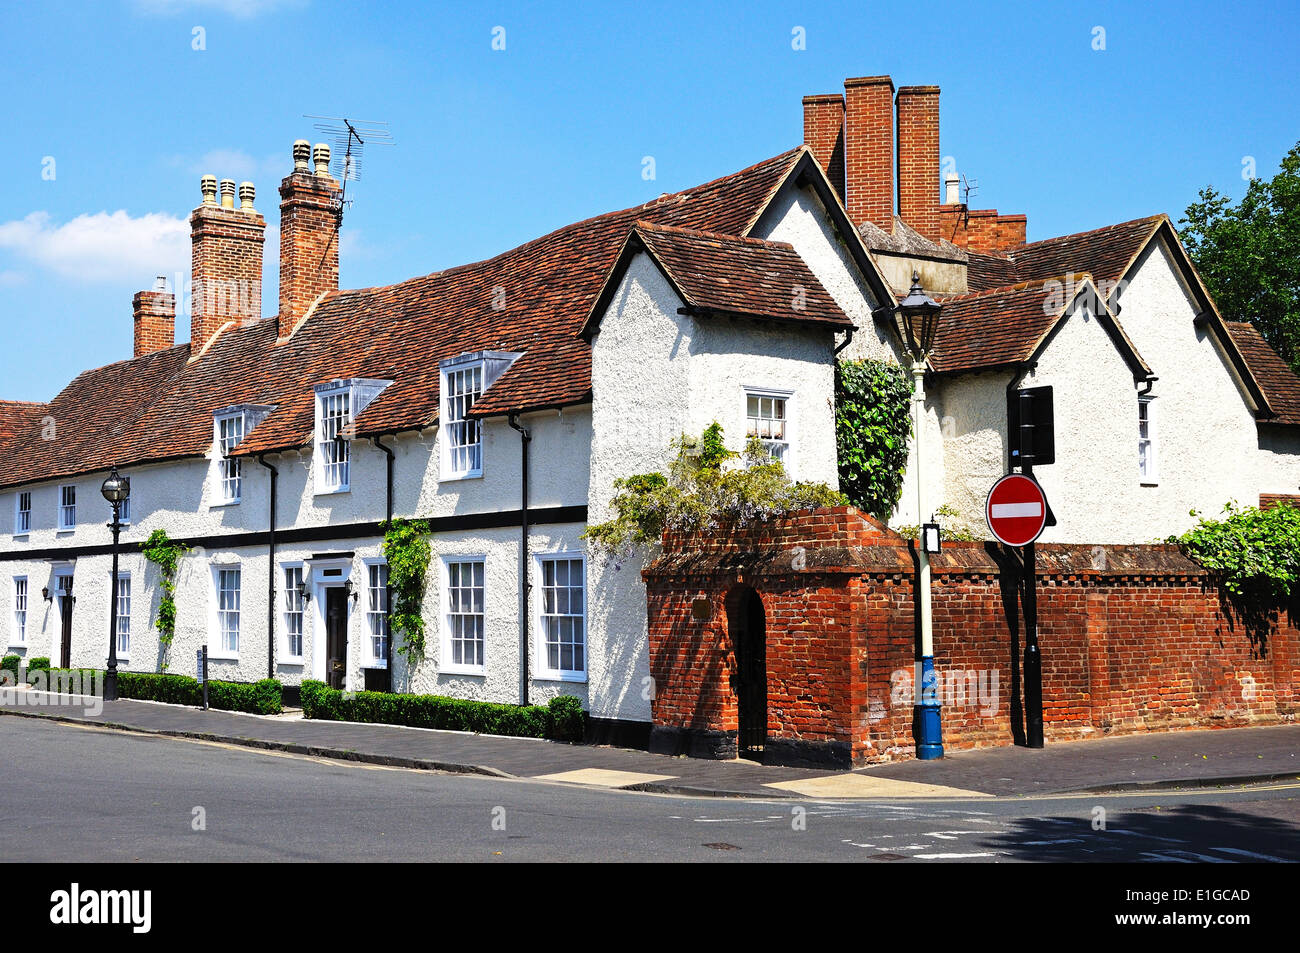 Row of cottages along Old Town, Stratford-Upon-Avon, Warwickshire, England, UK, Western Europe. Stock Photo